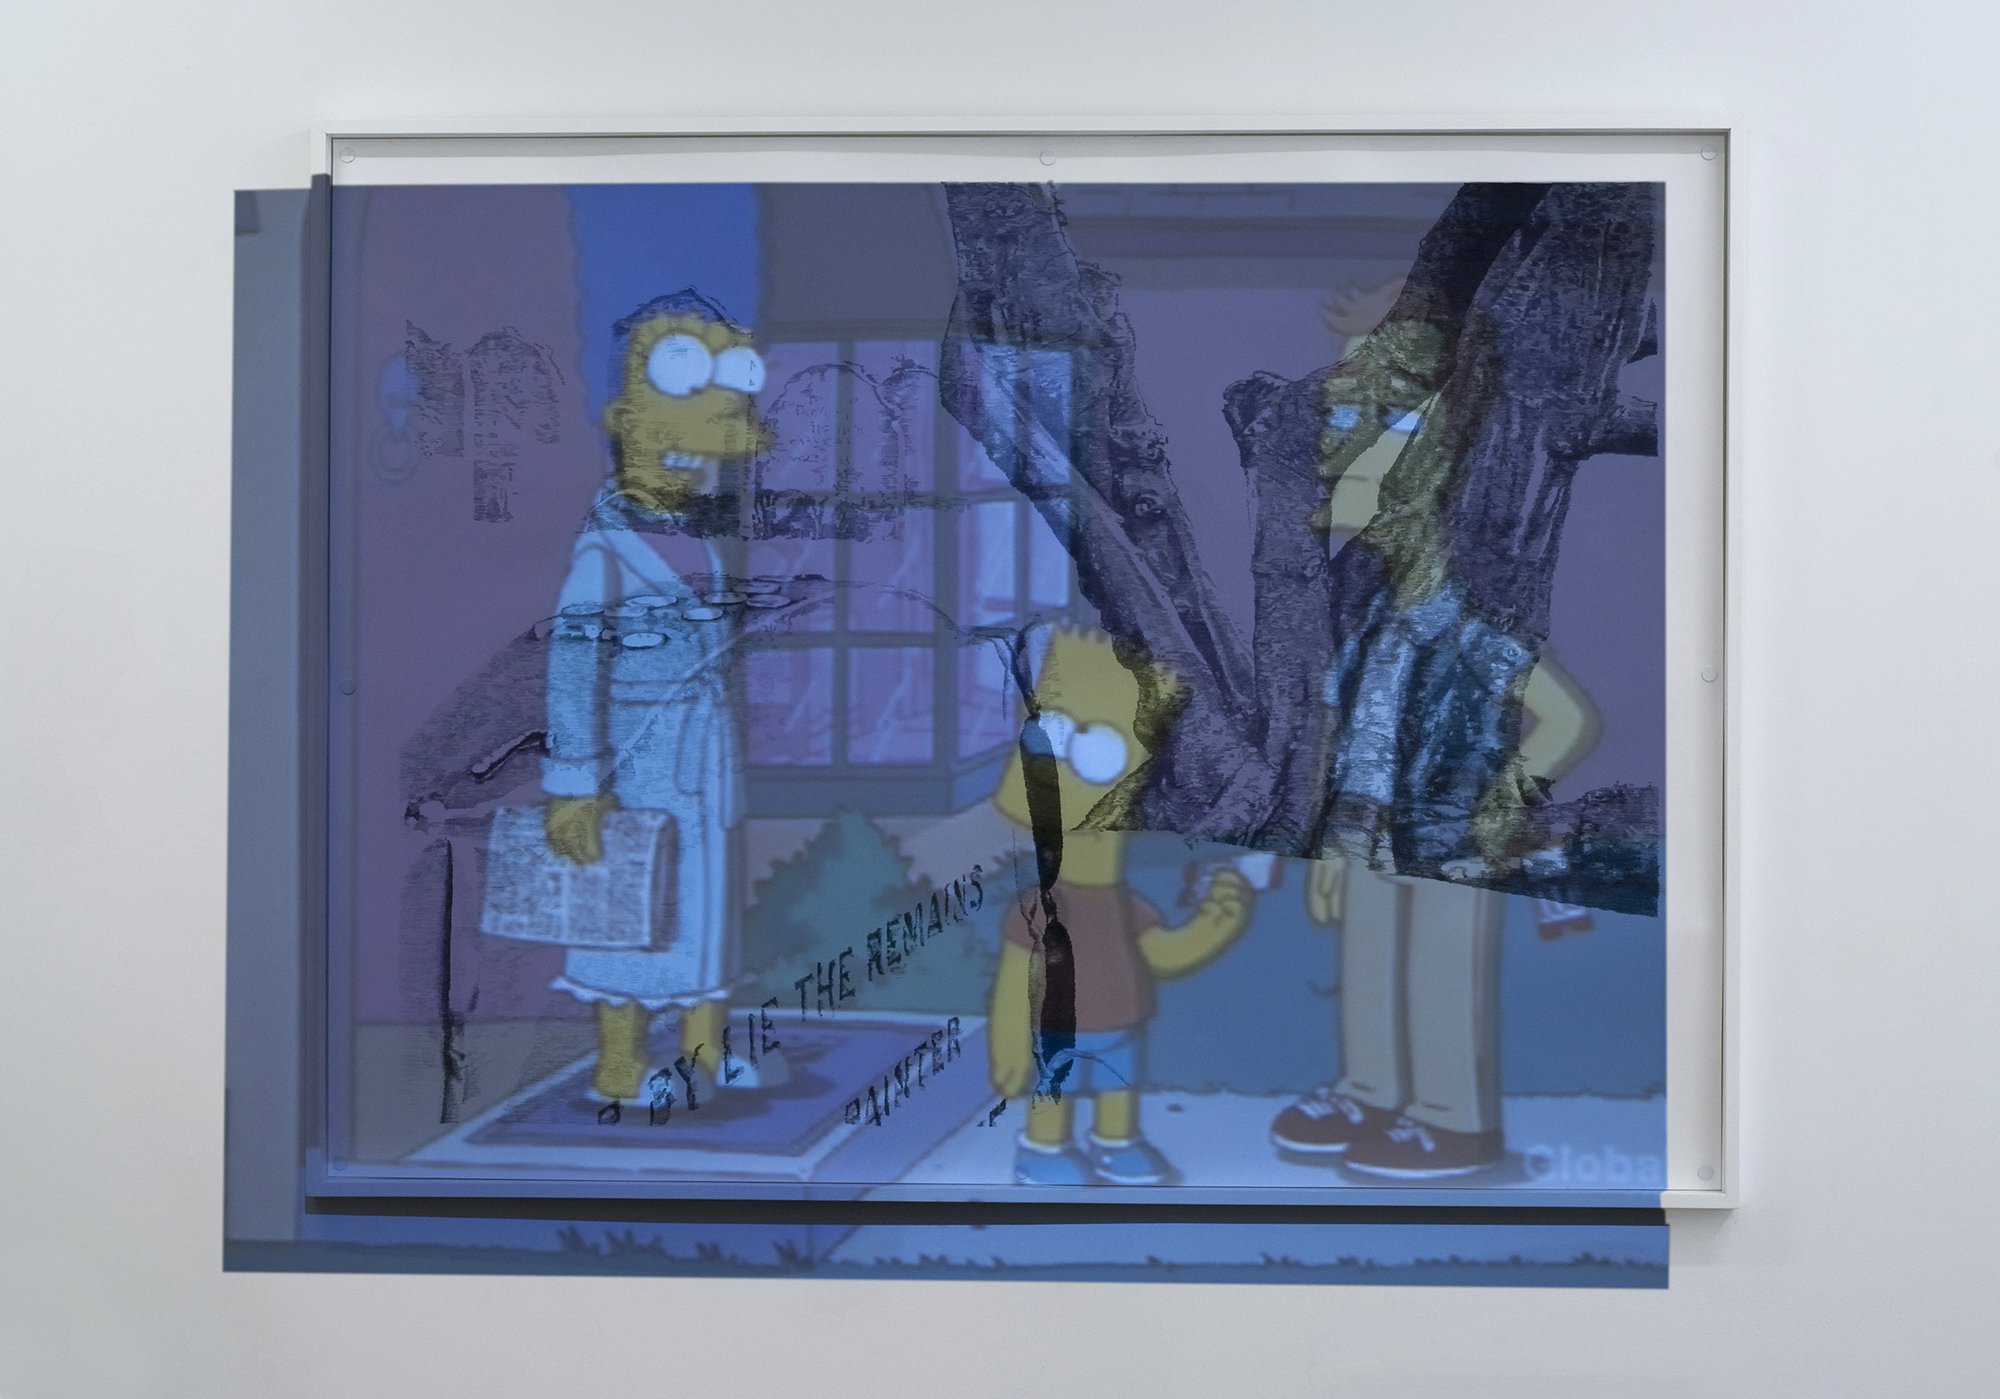 Mark Aerial Waller, Offering Transmissions #1, graphite on paper, projection of recent episode of The Simpsons, 191 x 143 cm, 2011-2012. Installation view, Offering Transmissions, Rodeo, Istanbul, 2012